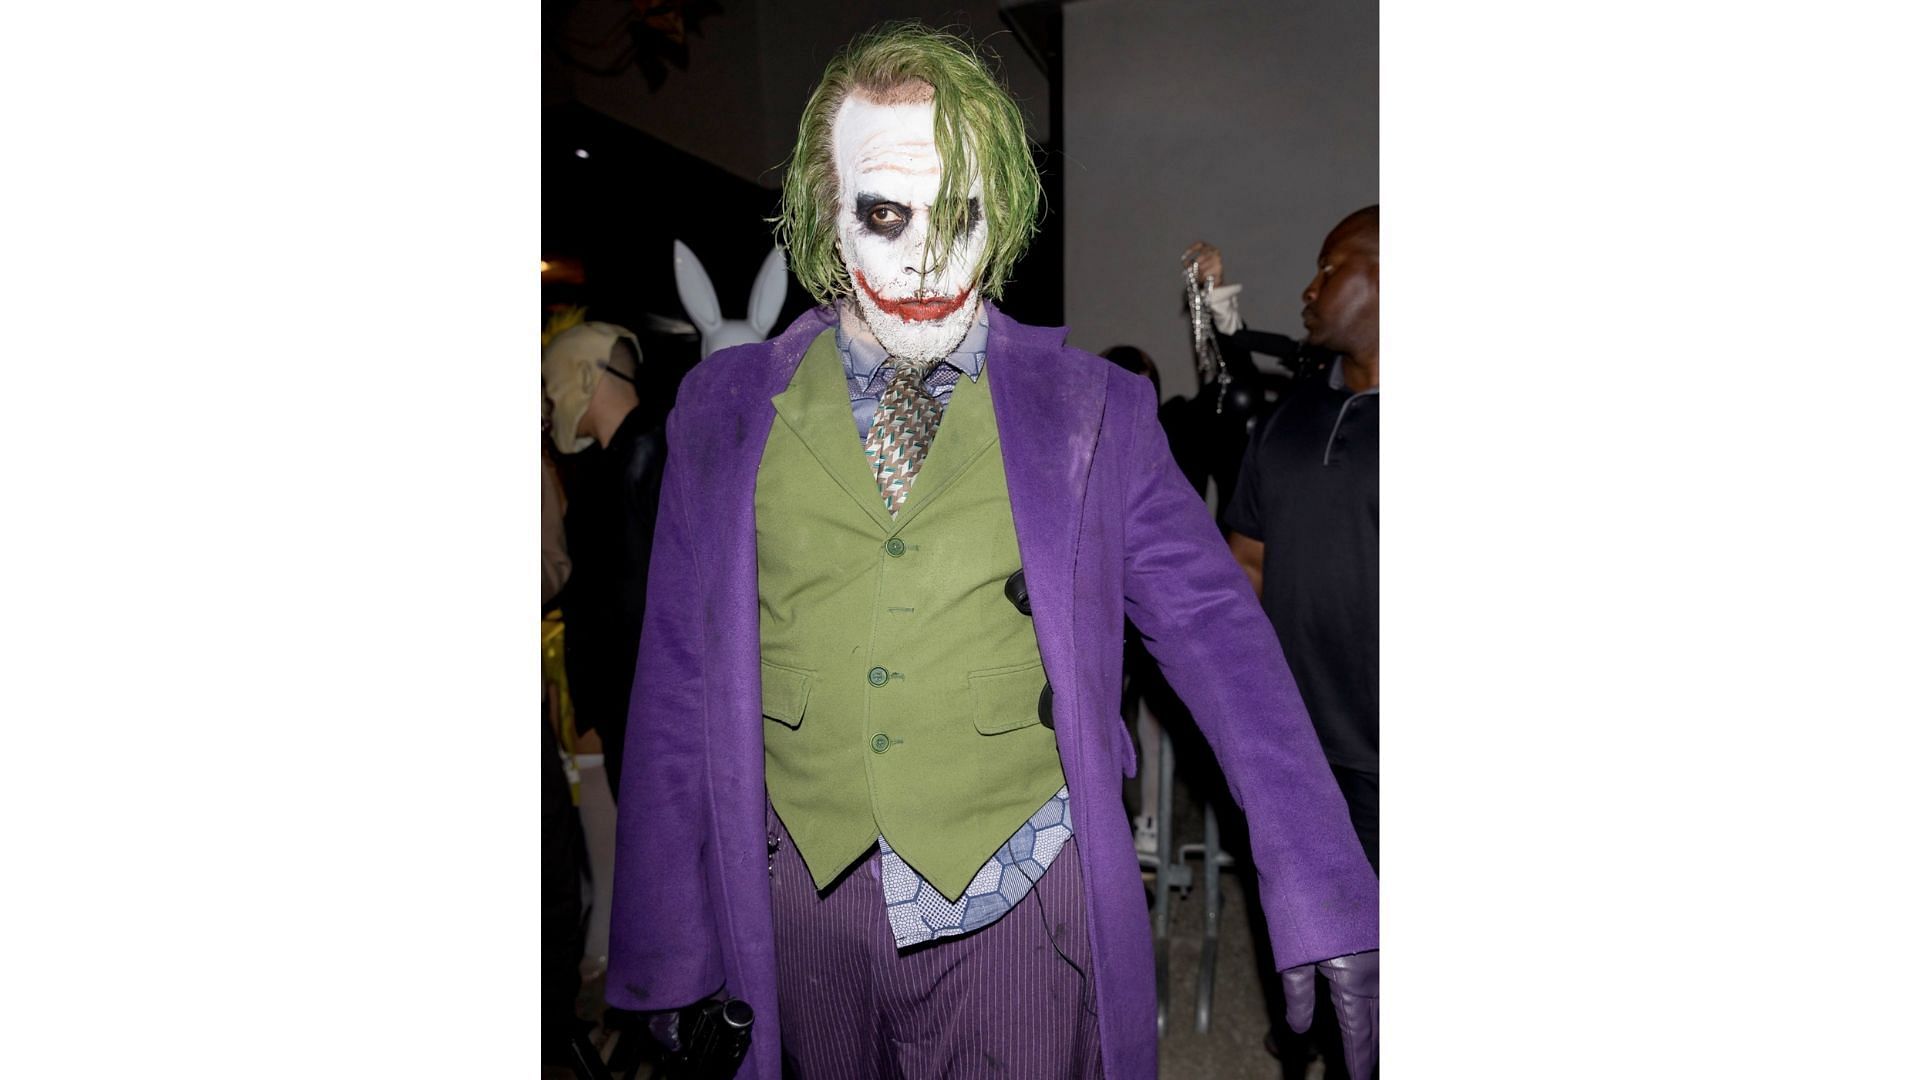 Sean Combs shows out in his Halloween costume (Image via Backgrid/Frank Vasquez)